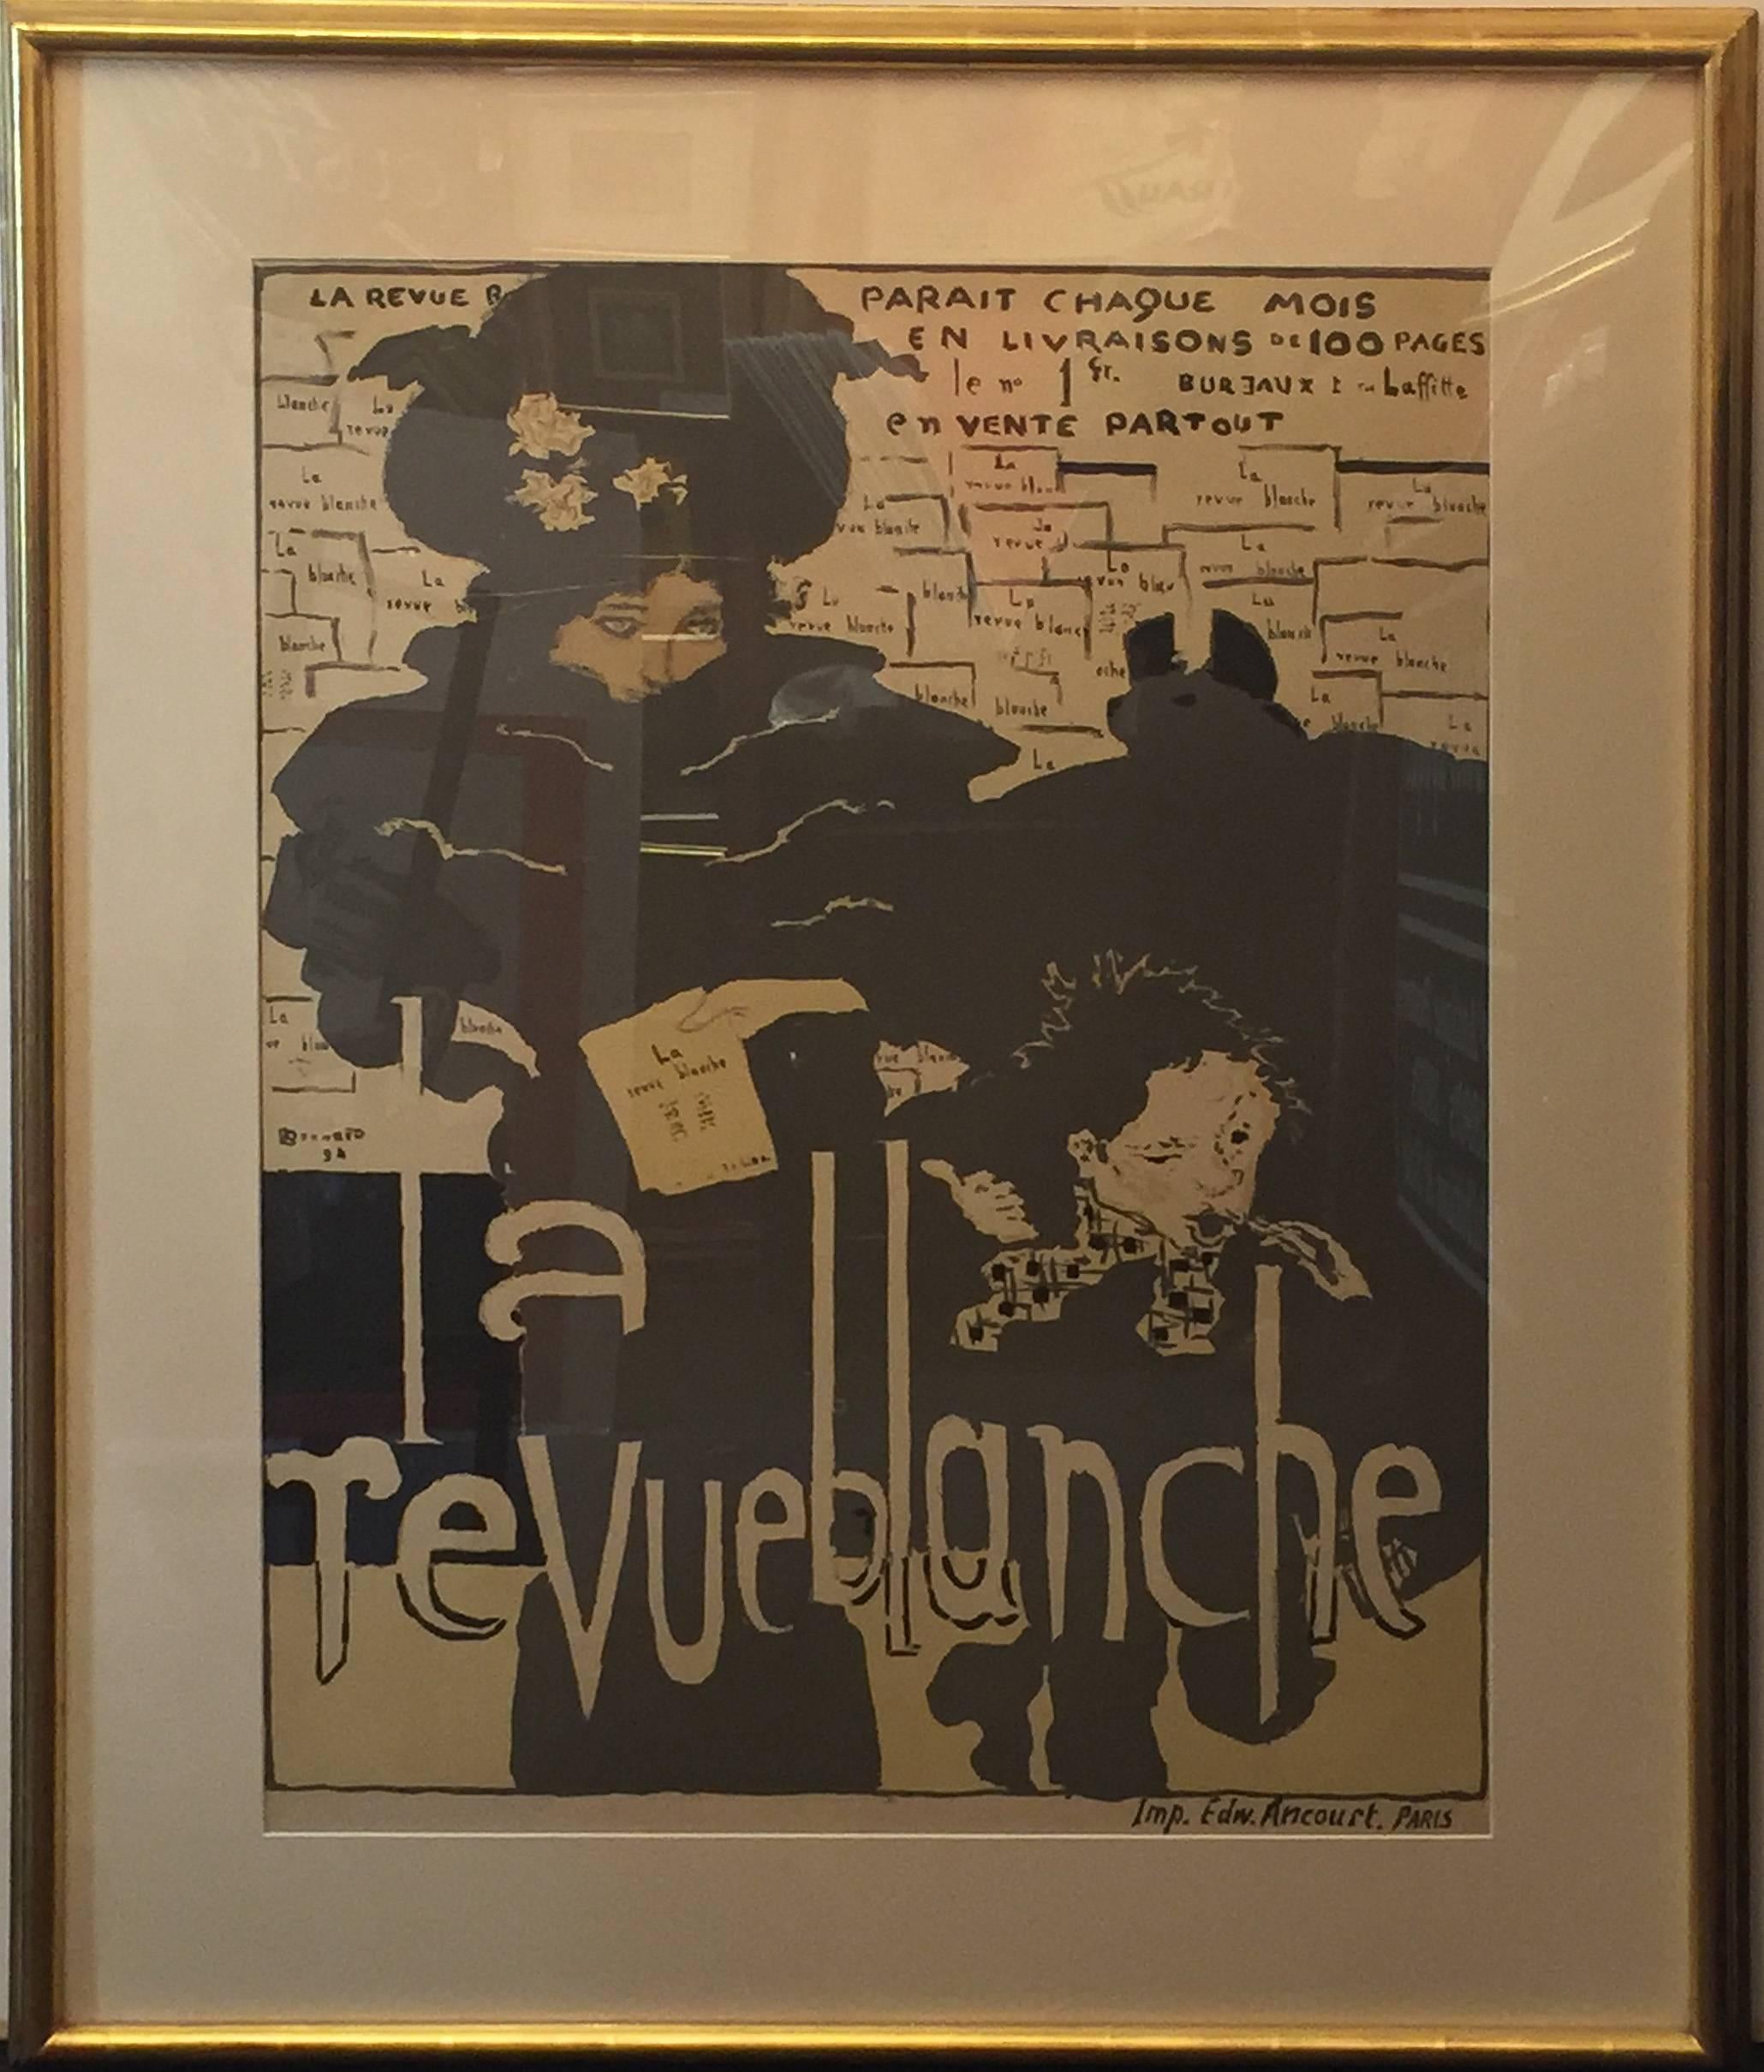 This is a French Art Nouveau period poster by Pierre Bonnard advertising the monthly publication La Revue Blanche. This stone lithograph features a monochromatic color scheme of grays and off-whites and deformed shapes and figures that looks forward